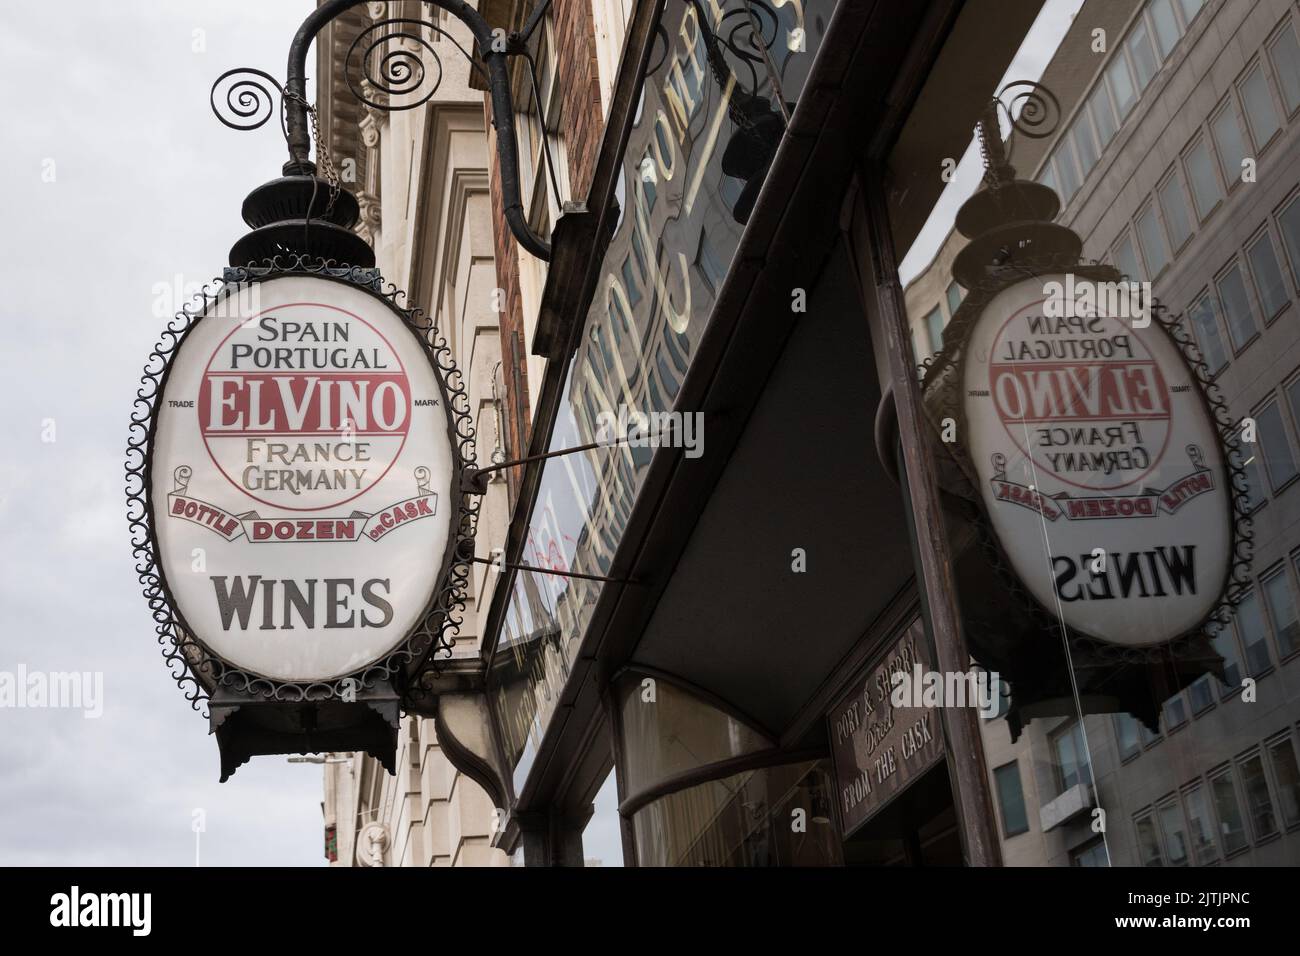 El Vino wine shop and bar - a famous haunt of journalists and barristers as immortalised as 'Pomeroys' in Rumpole of the Bailey, London, England, UK Stock Photo